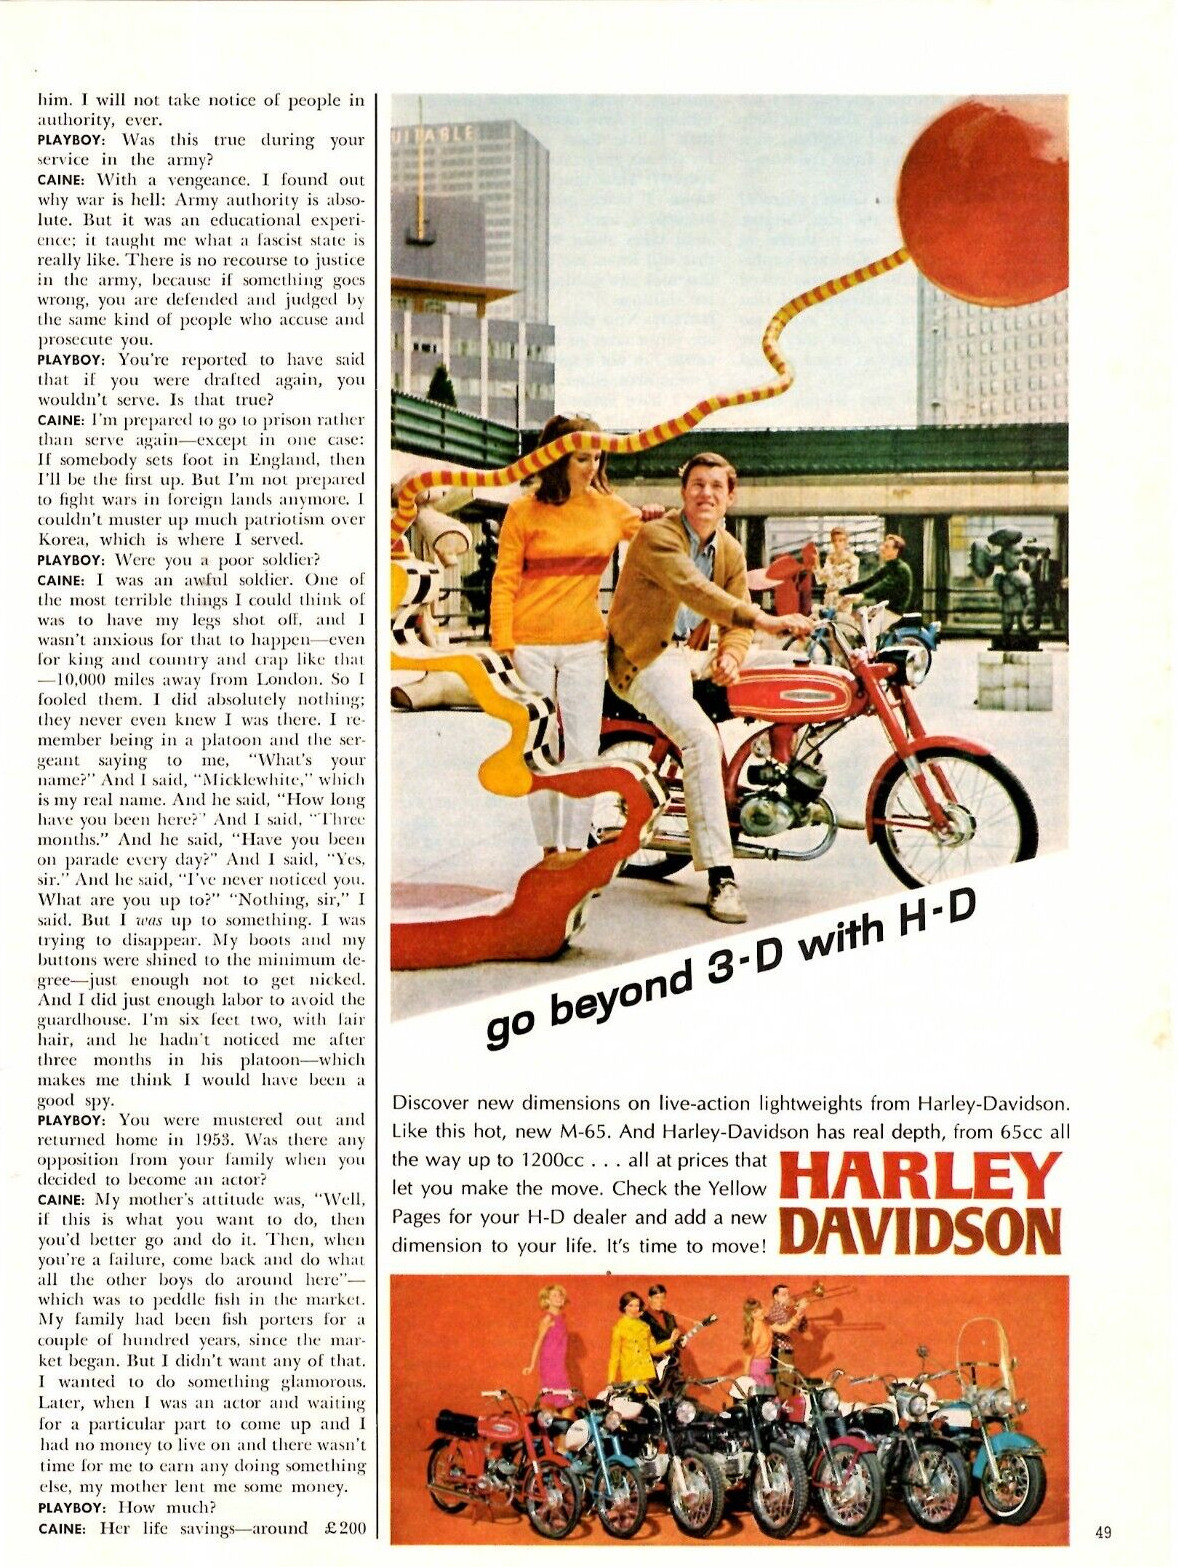 1967 Print Ad Harley Davidson Motorcycle Go Beyond 3-D with HD 65 cc to 1200cc